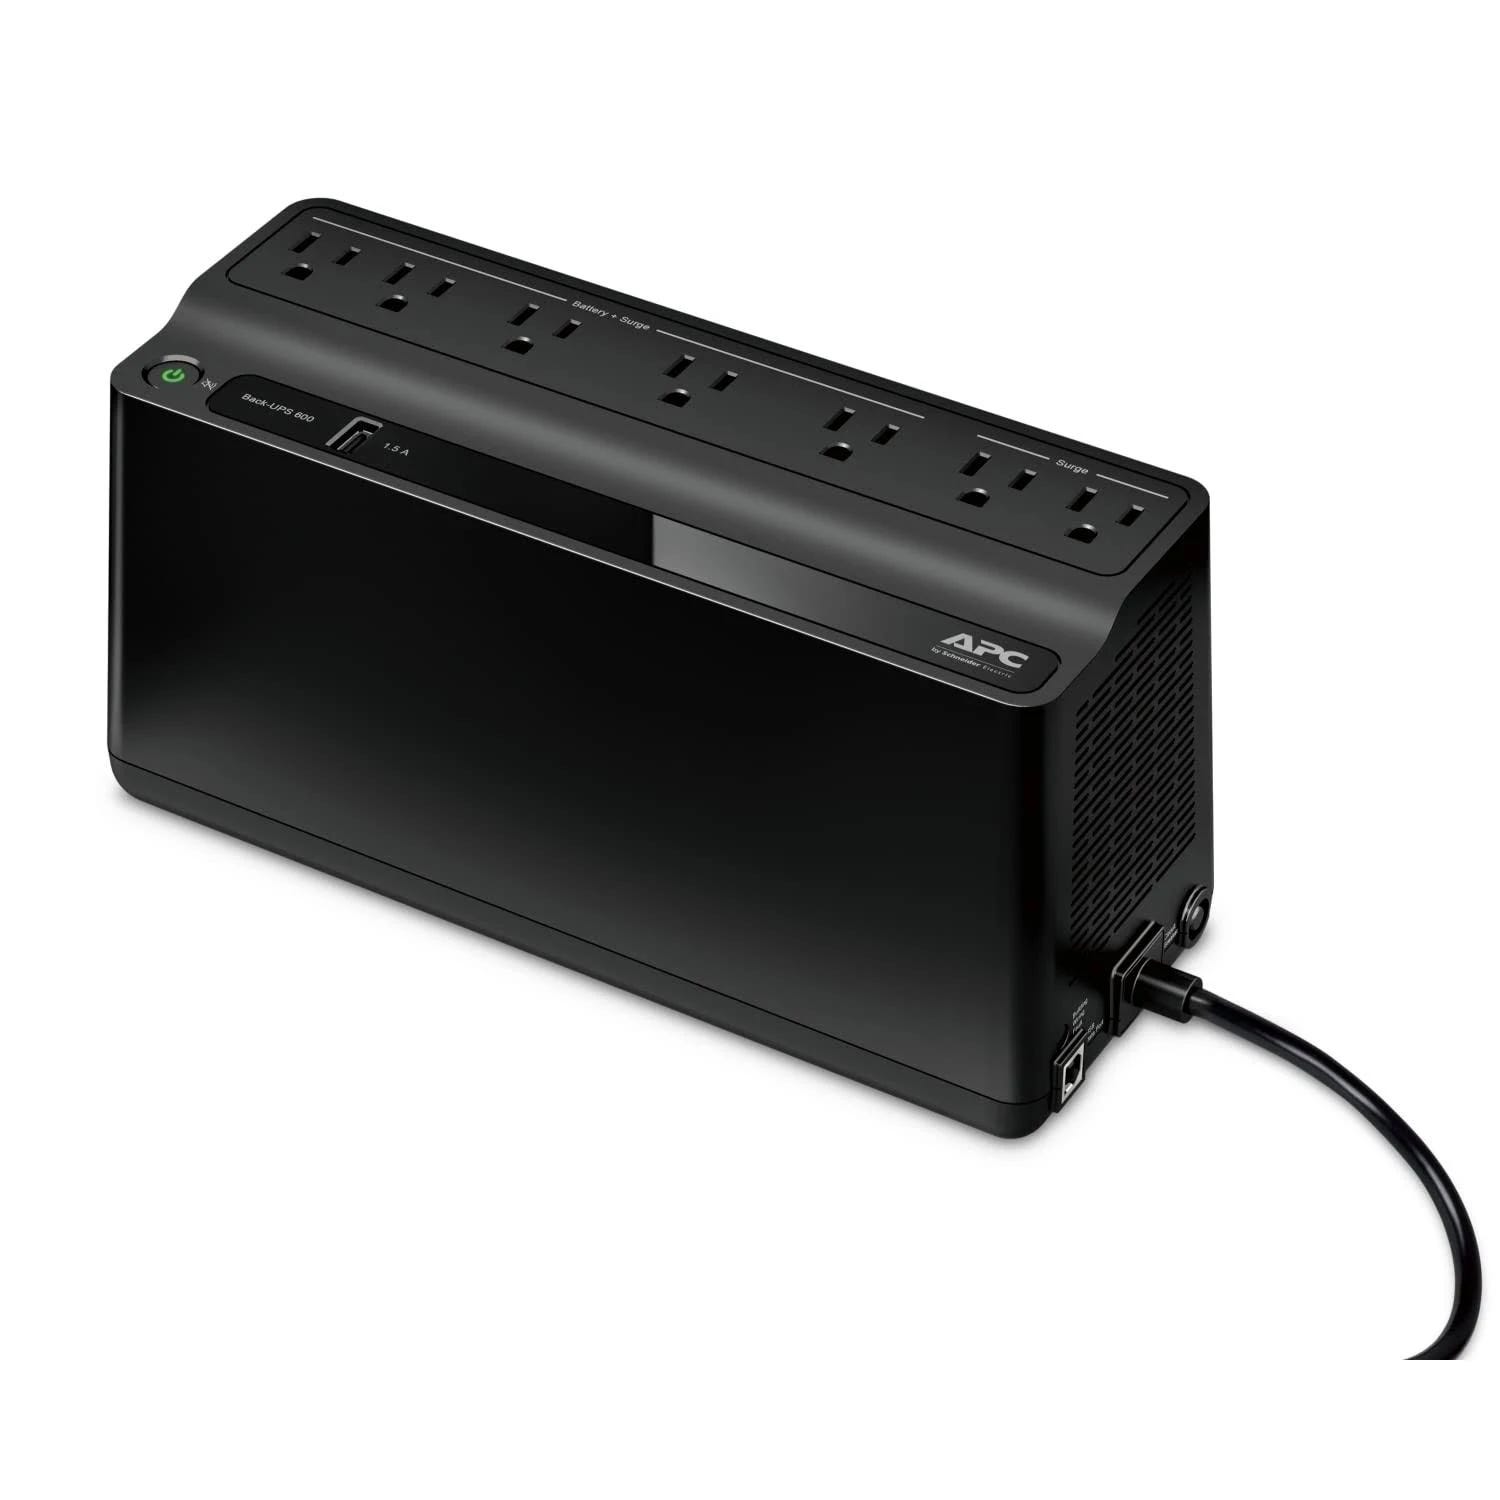 APC 600VA Ups Battery Backup for PCs and Devices | Image